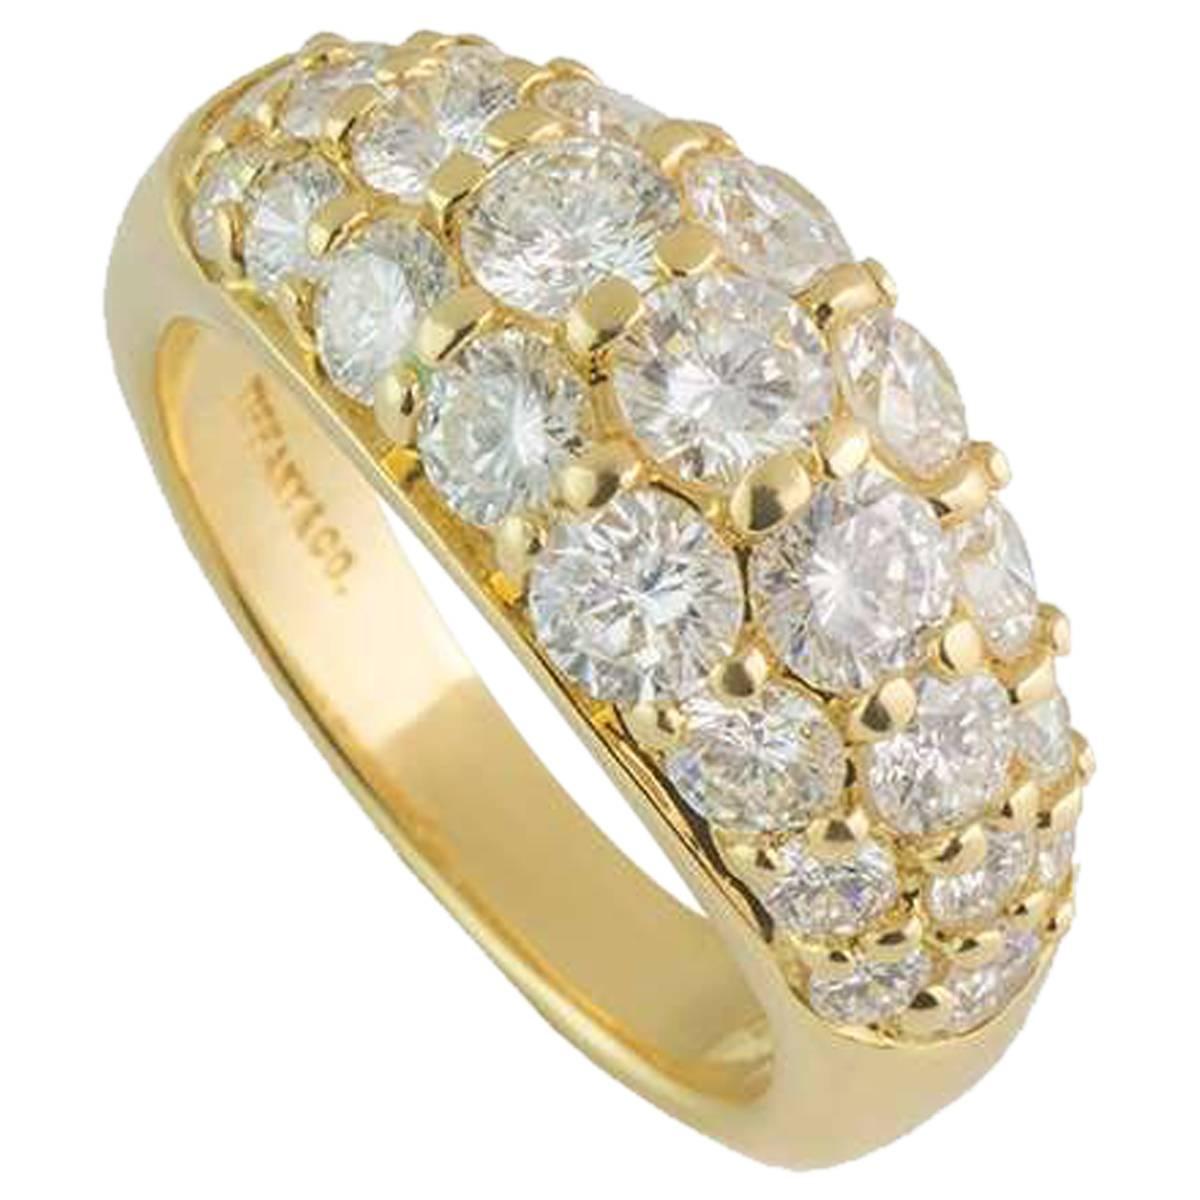 A stunning 18k yellow gold diamond set bombe style half eternity ring by Tiffany & Co. The ring is set to the centre with three rows of graduating round brilliant cut diamonds, each individually claw set, totalling approximately 2.20ct,